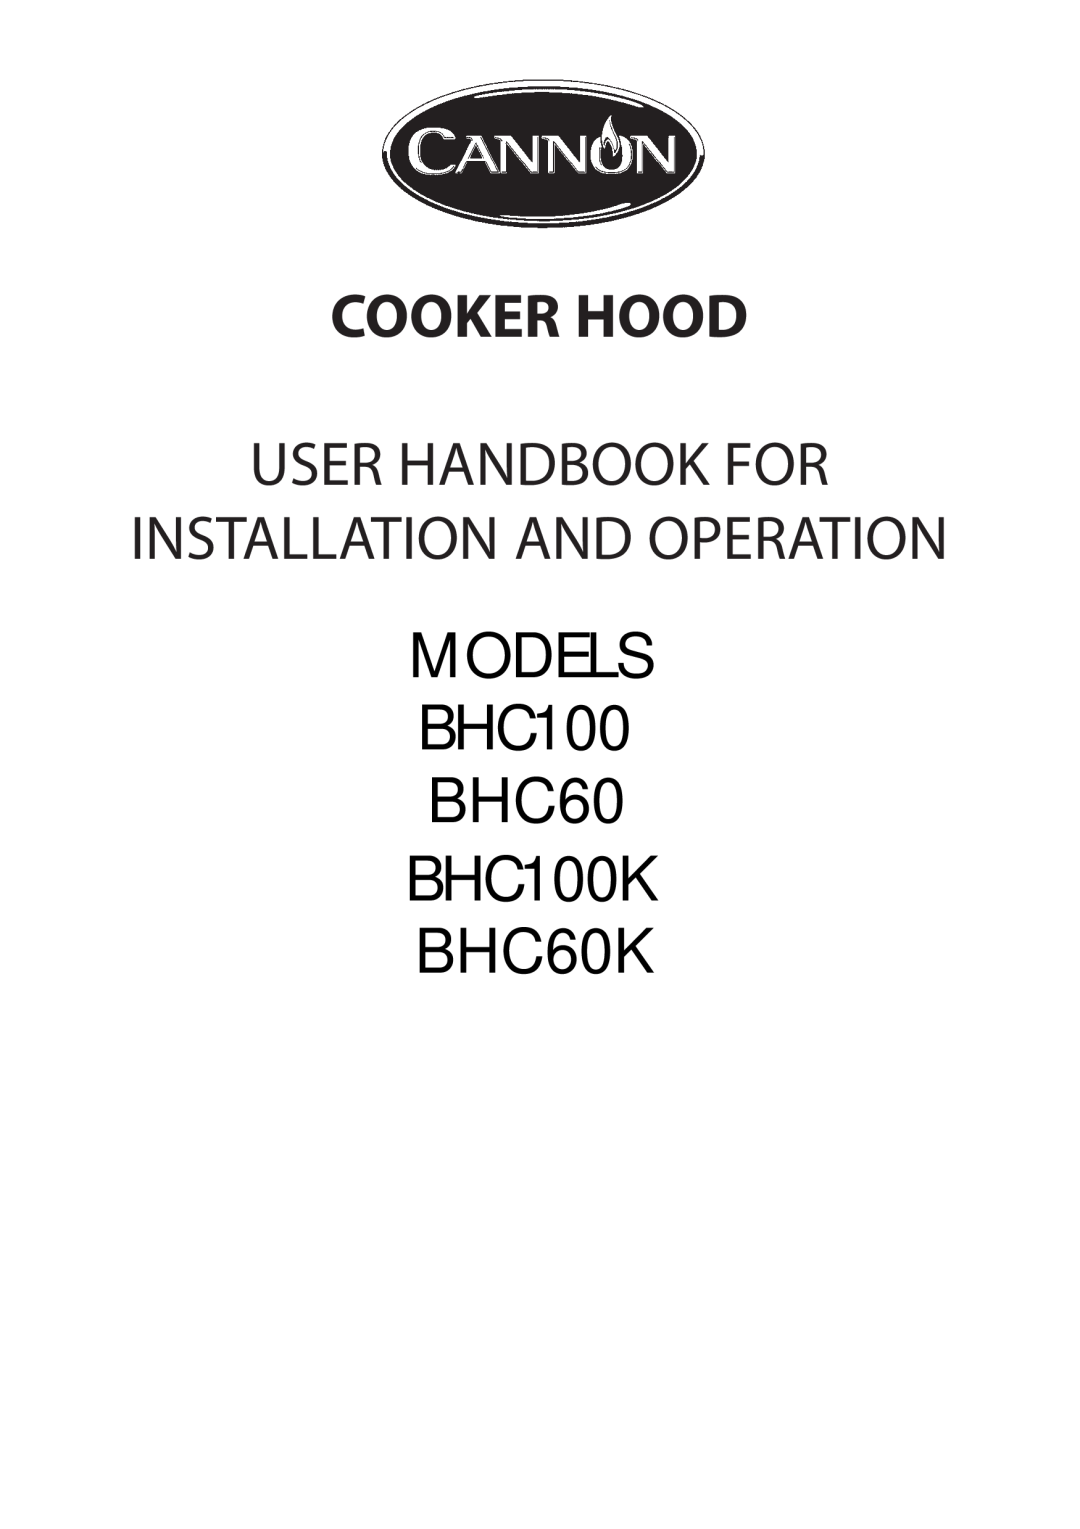 Cannon BHC60K manual Cooker Hood, User Handbook For, MODELS BHC100, BHC100K, Installation And Operation 